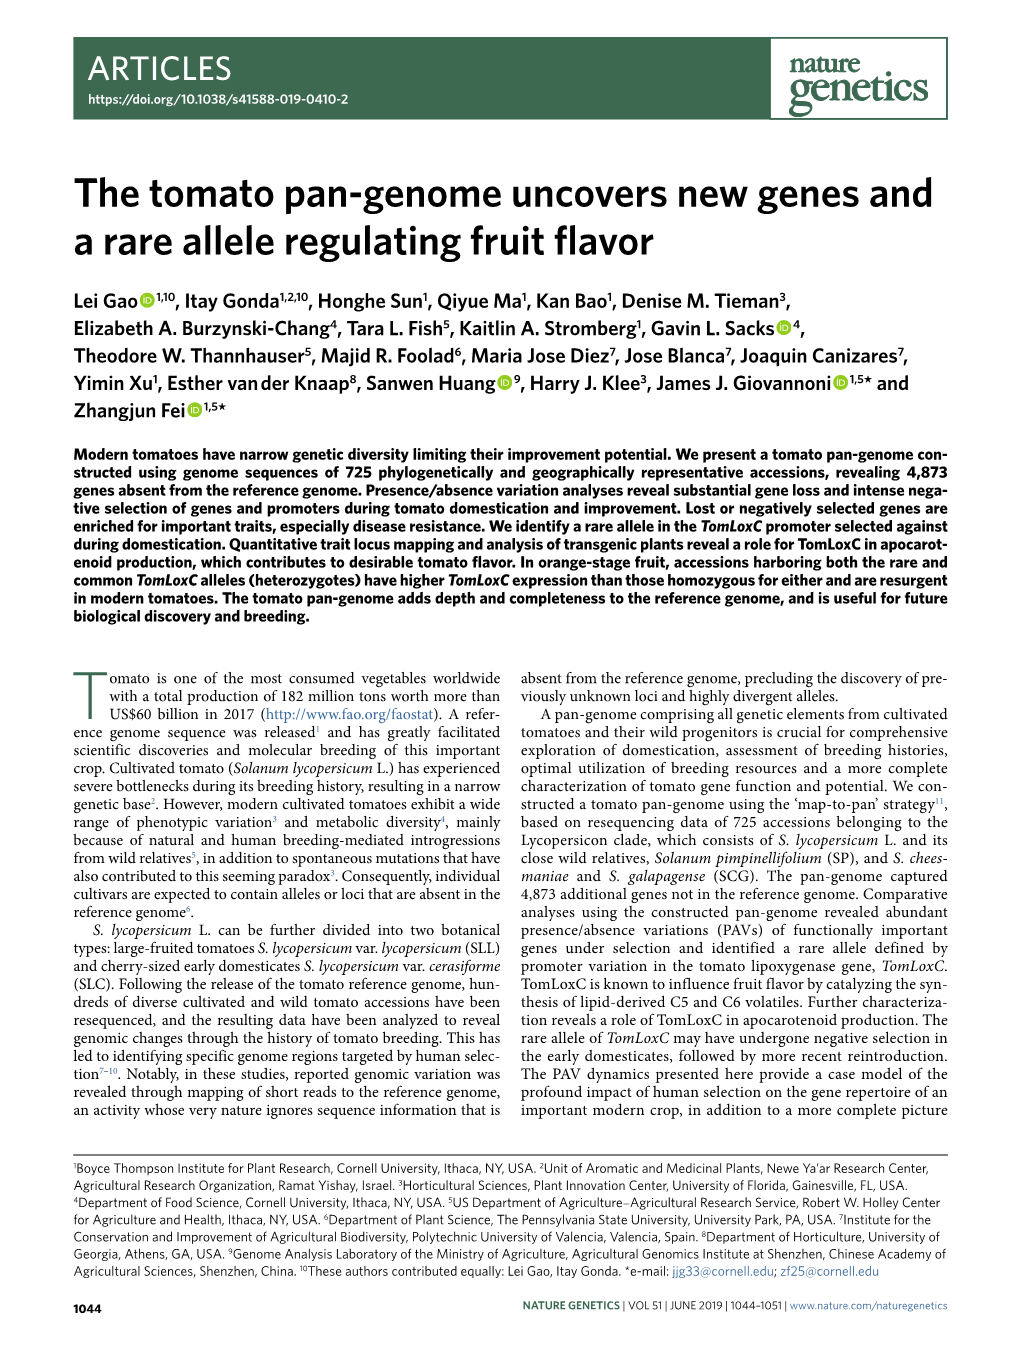 The Tomato Pan-Genome Uncovers New Genes and a Rare Allele Regulating Fruit Flavor